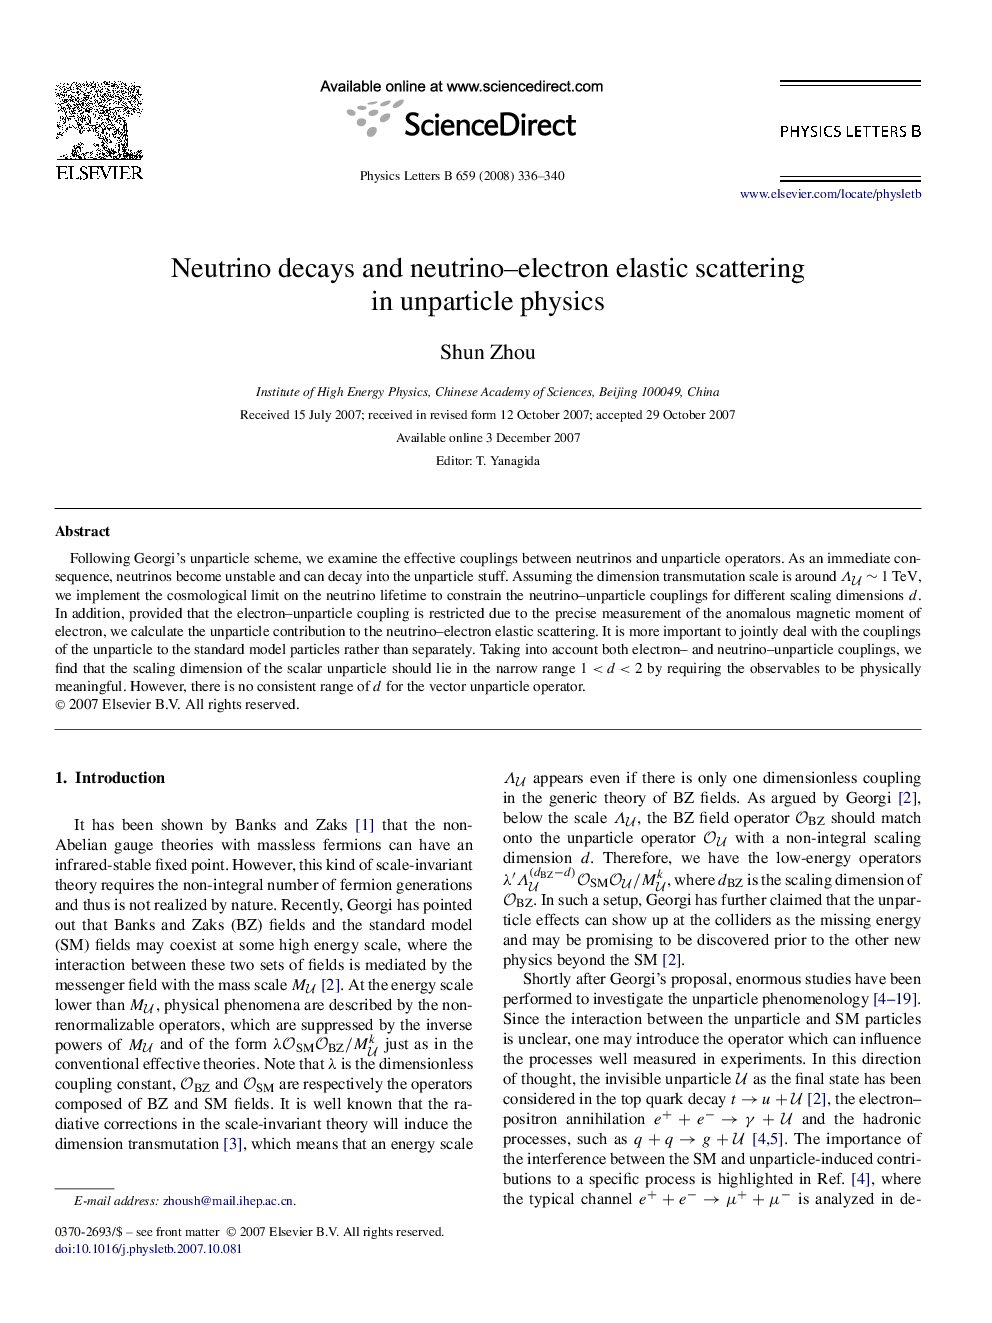 Neutrino decays and neutrino-electron elastic scattering in unparticle physics